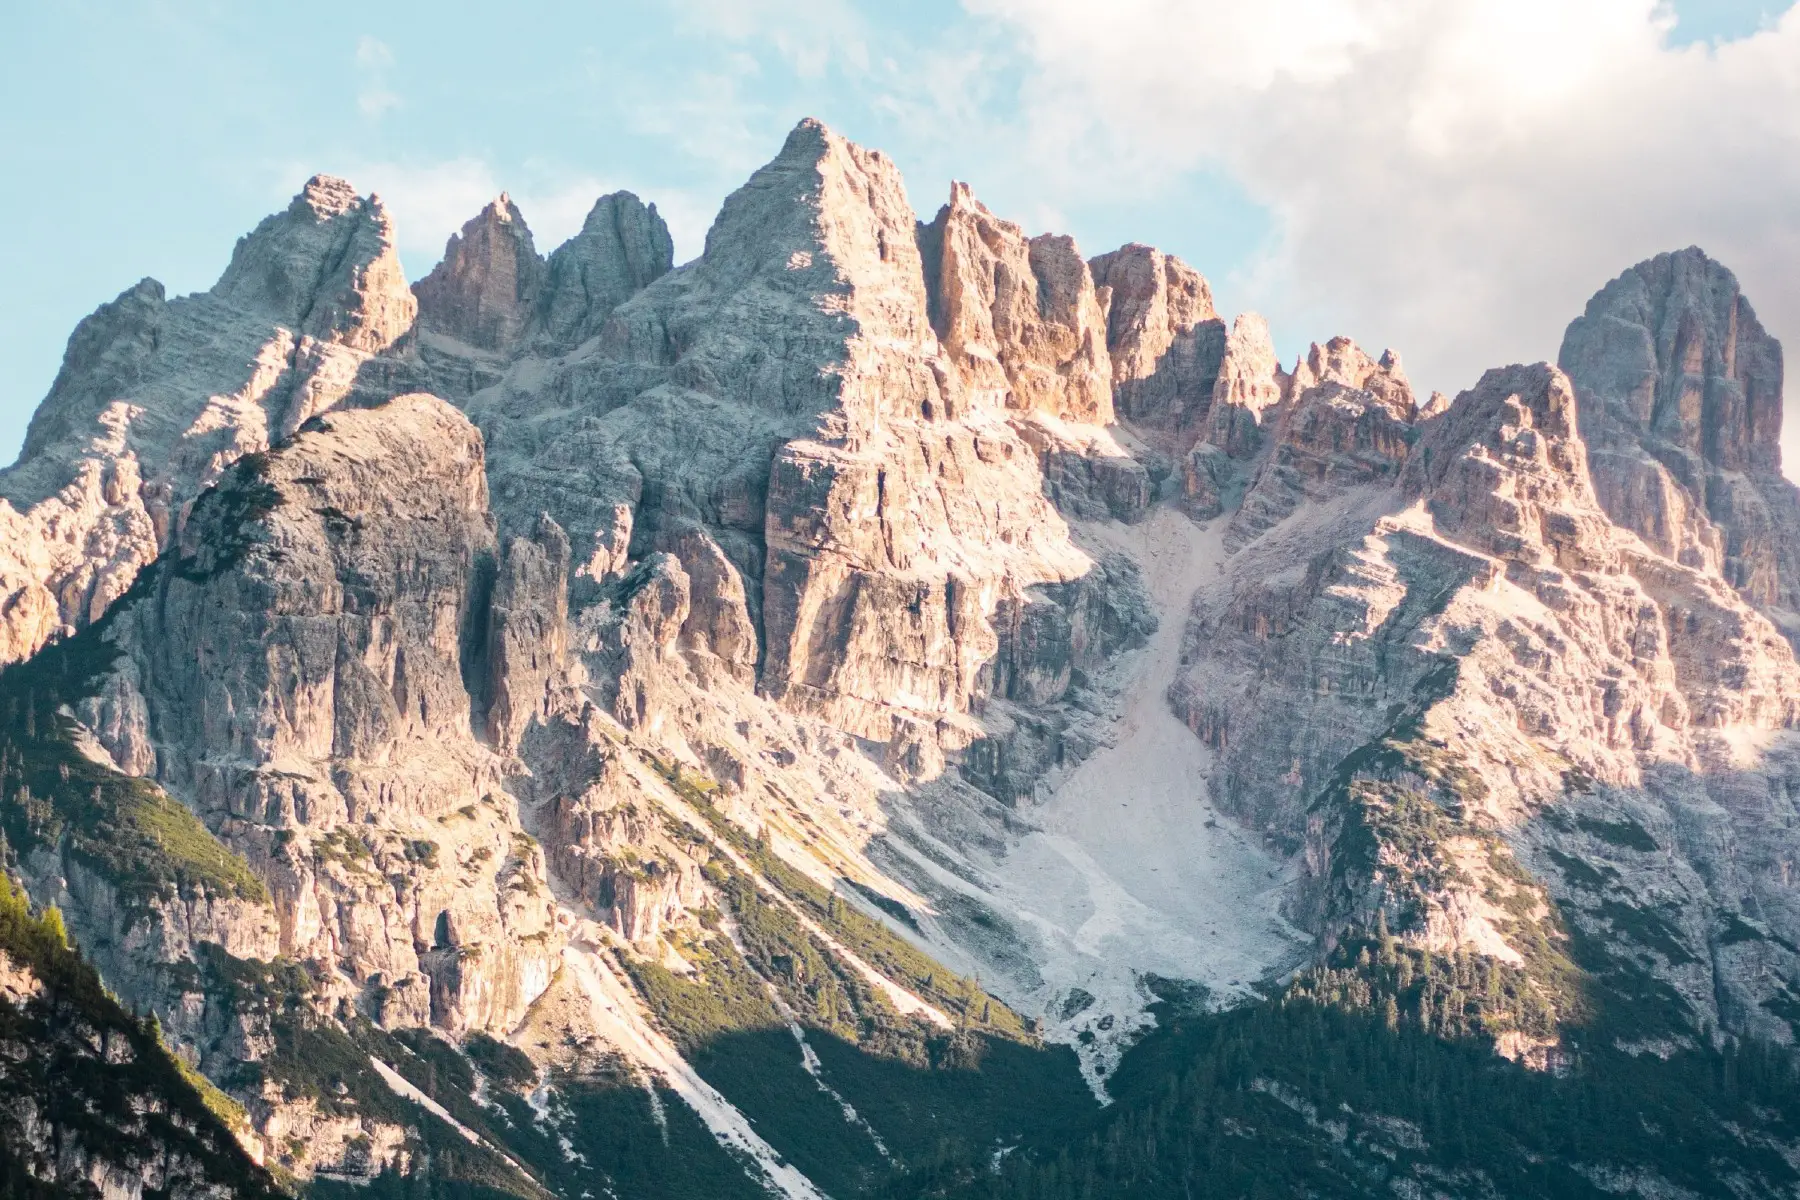 A long shot of the Dolomites lit up by the sun